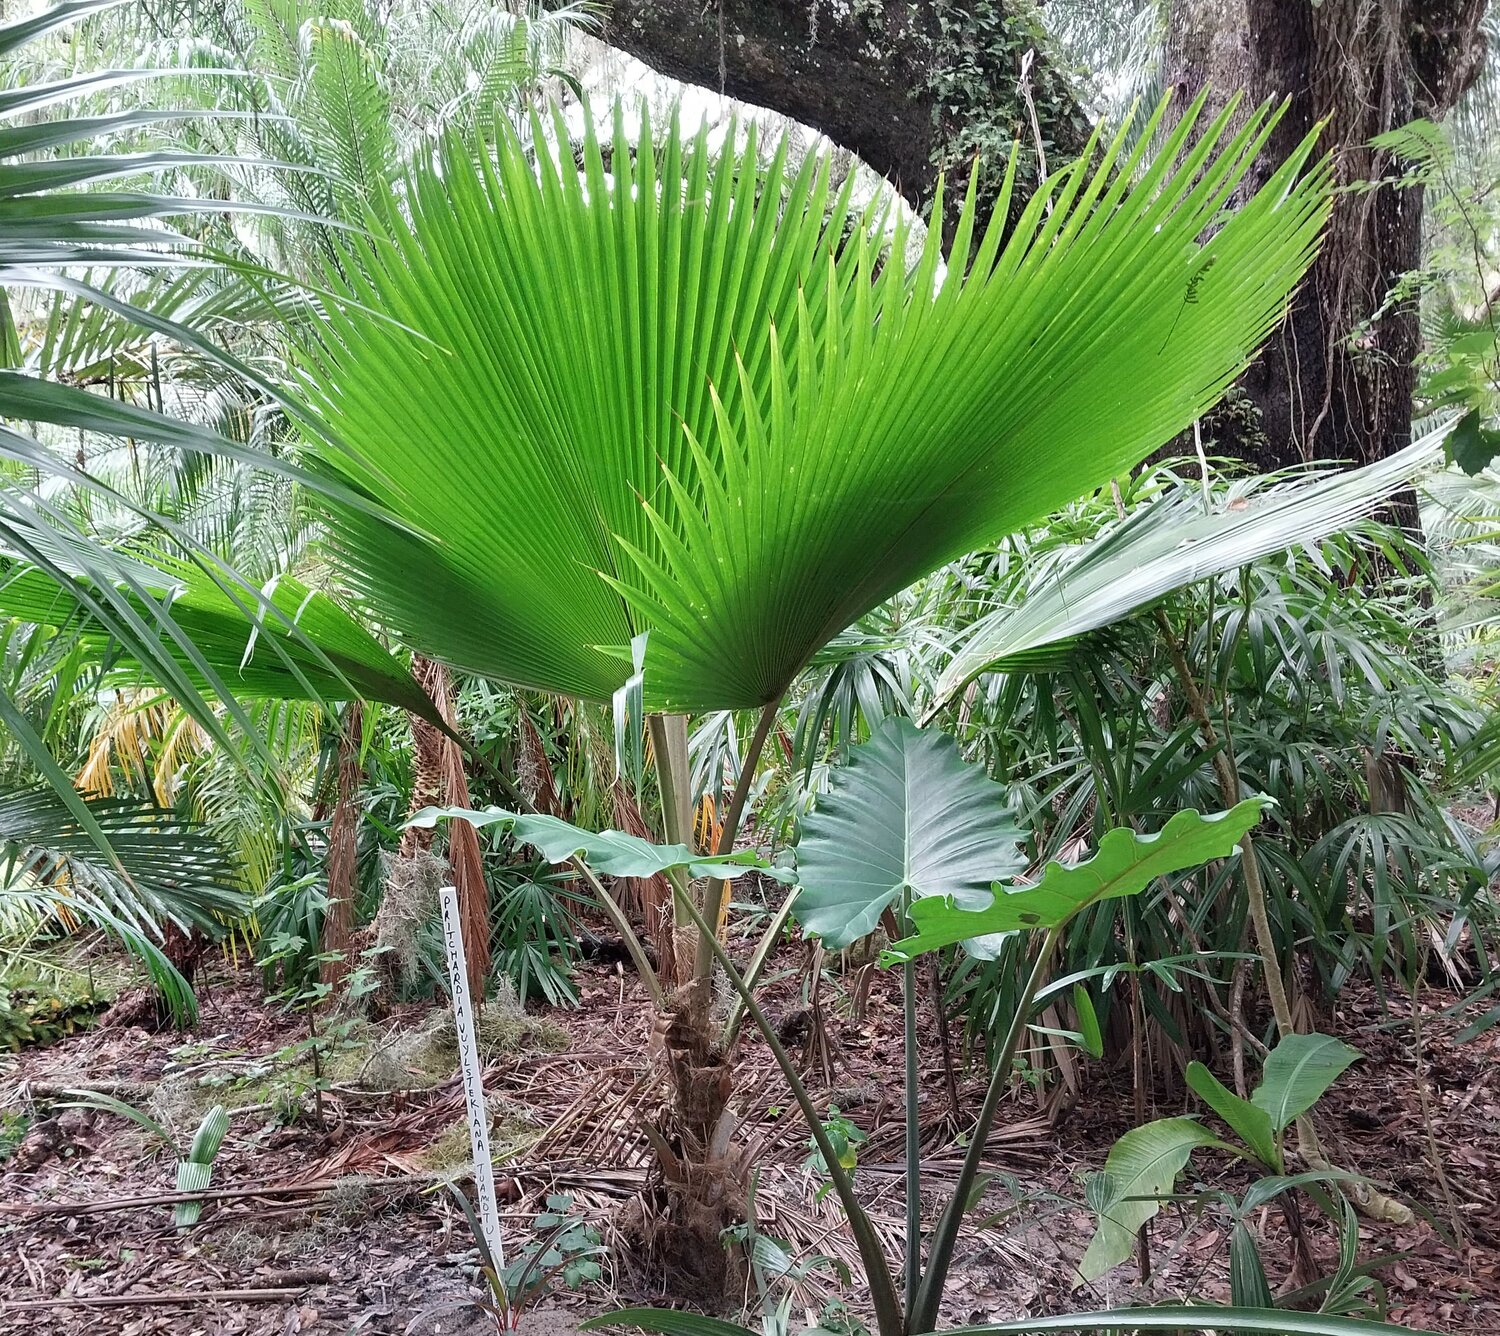 This incredible palm comes from the South Pacific.